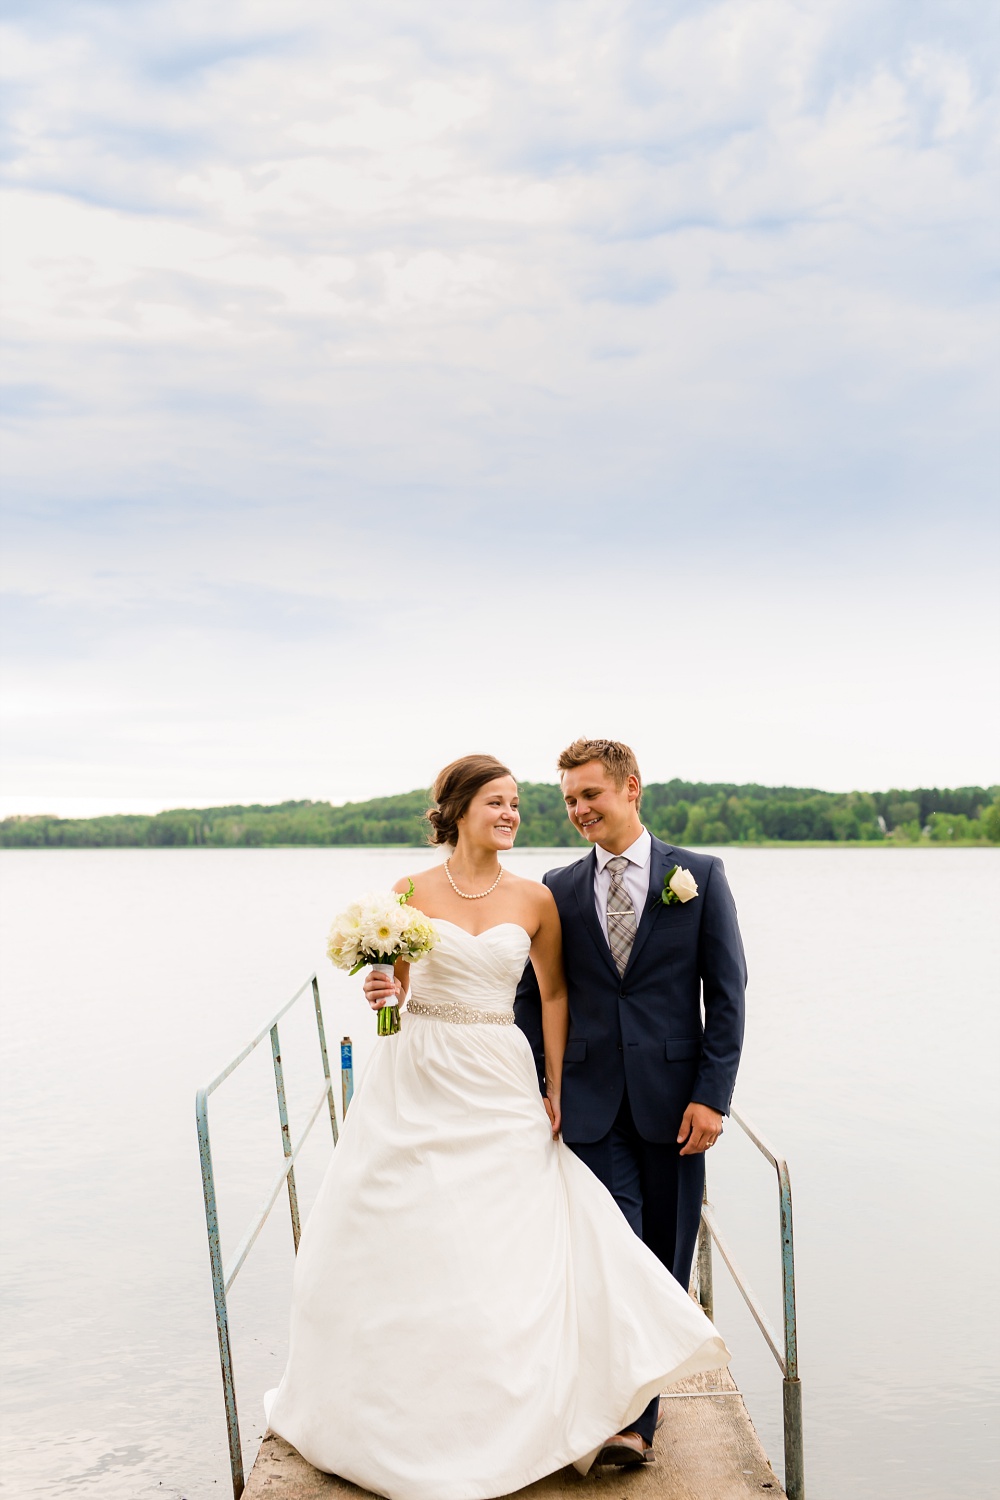 Wolf Lake, MN Country Styled Wedding, White Dress, Blue Suite | Photographed by Amber Langerud Photography | Bride &amp; Groom Walking on a Dock